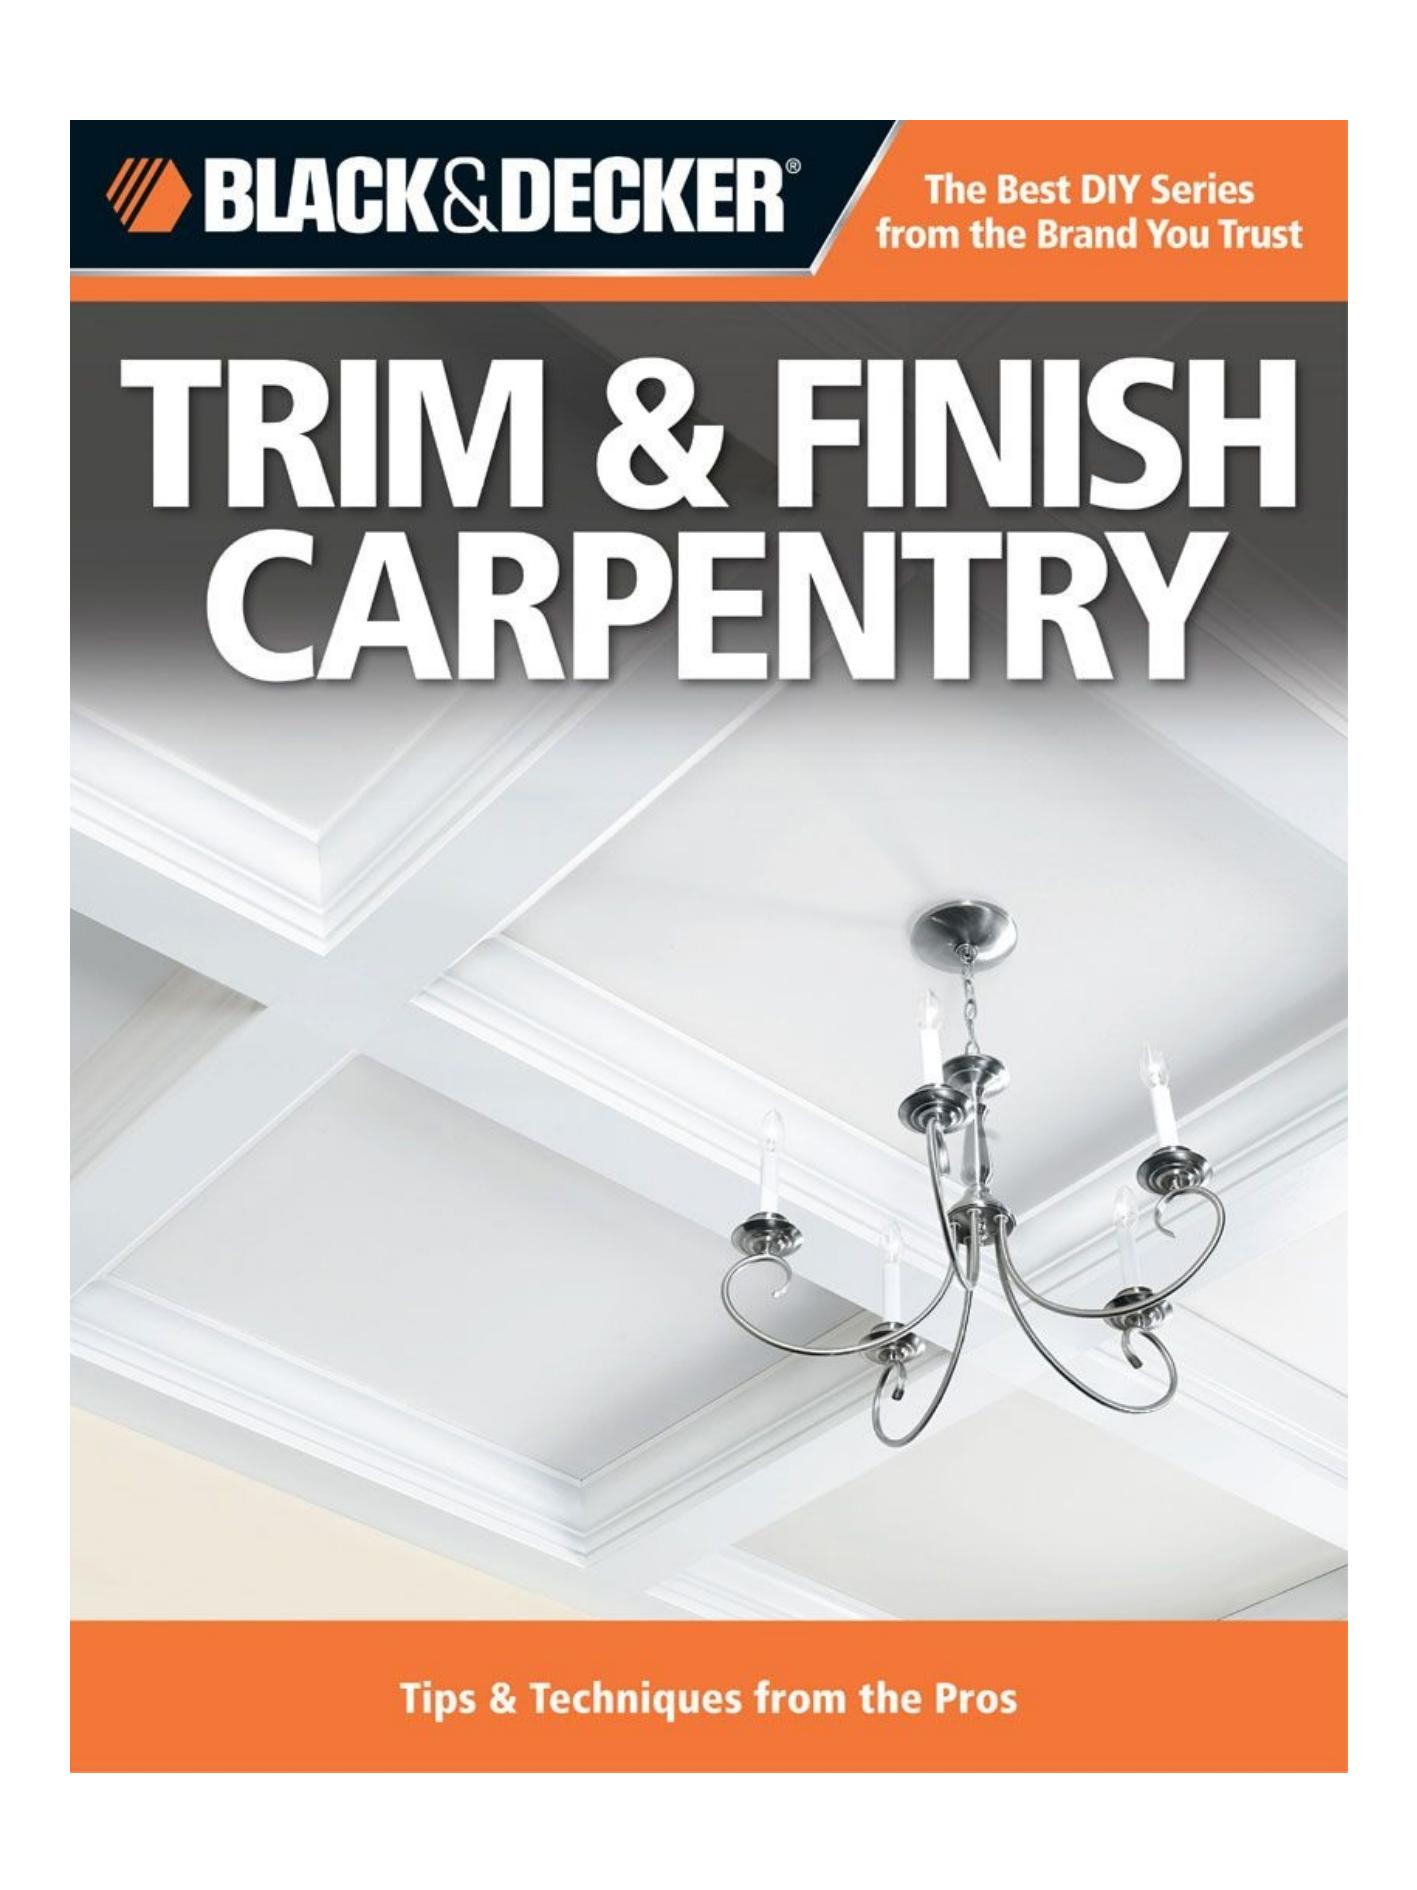 Black & Decker Trim & Finish Carpentry: Tips & Techniques from the Pros by Editors of Creative Publishing